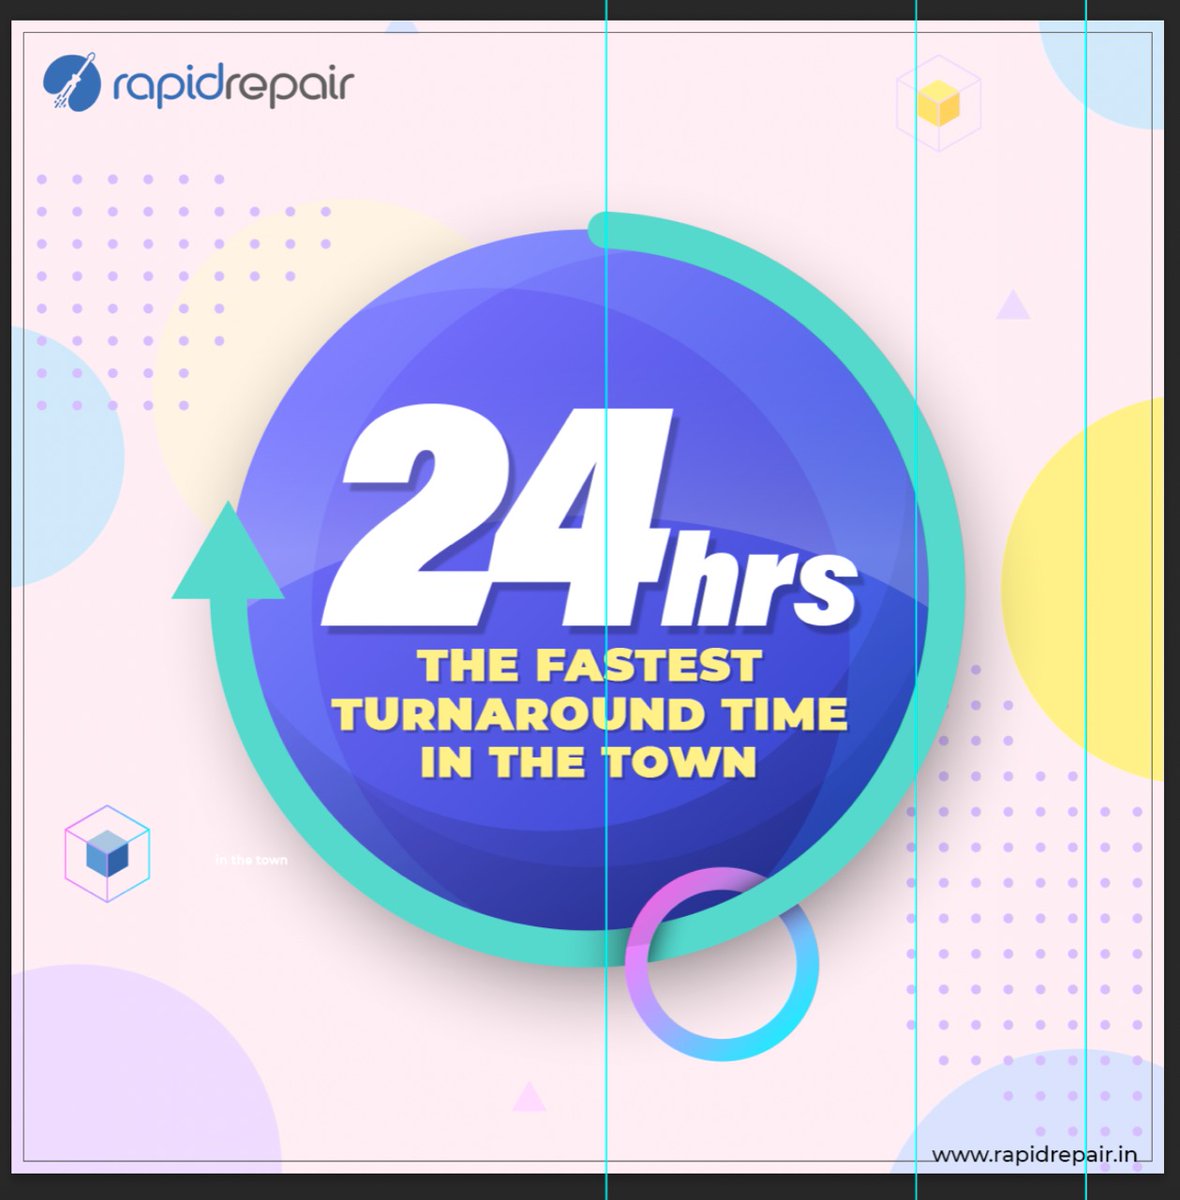 We bet you can't find a turnaround time shorter than ours. #RapidRepair #FasterRepair #24hours
 
To know more, click here - bit.ly/3vdsaLY.

 #WeWillFixIt #GiveUsACall #LeagueOfTechies #SmartphoneRepair #MobileRepair #iPadScreenRepair #OnePlus #iPhoneservice #smartphone